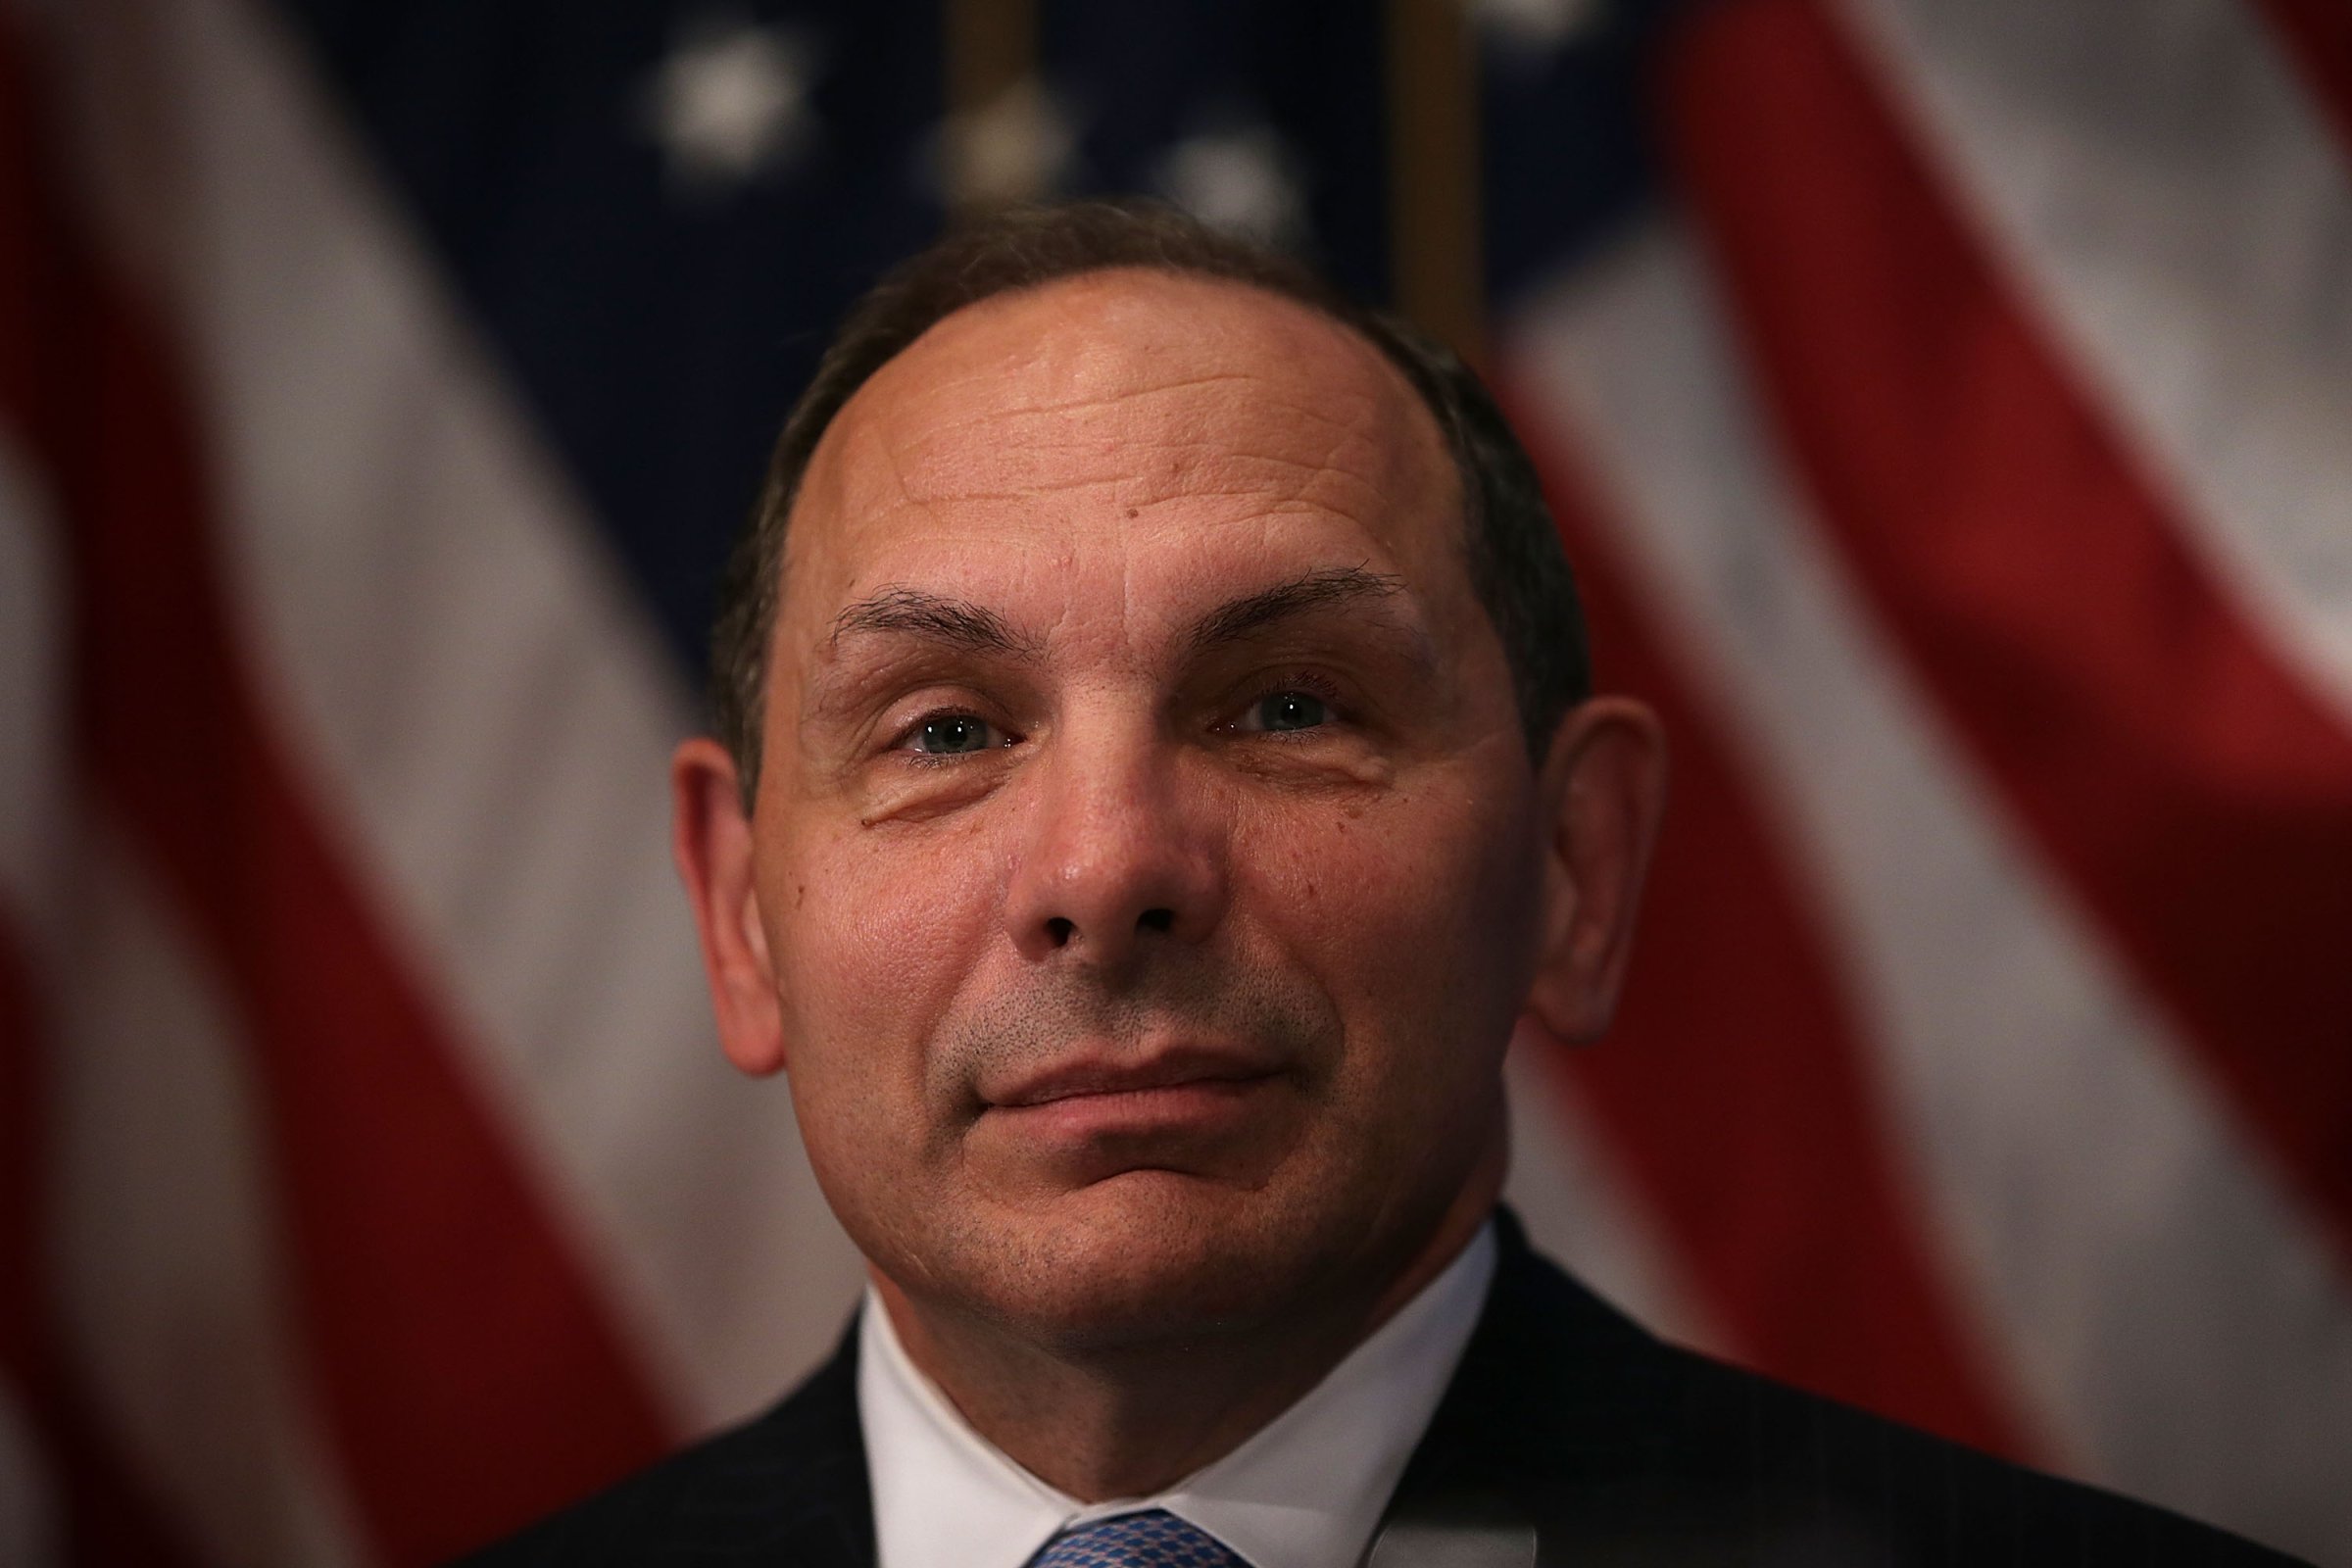 U.S. Secretary of Veterans Affairs Robert McDonald waits to be introduced prior to his address to a Newsmaker Luncheon at the National Press Club November 6, 2015 in Washington, DC.